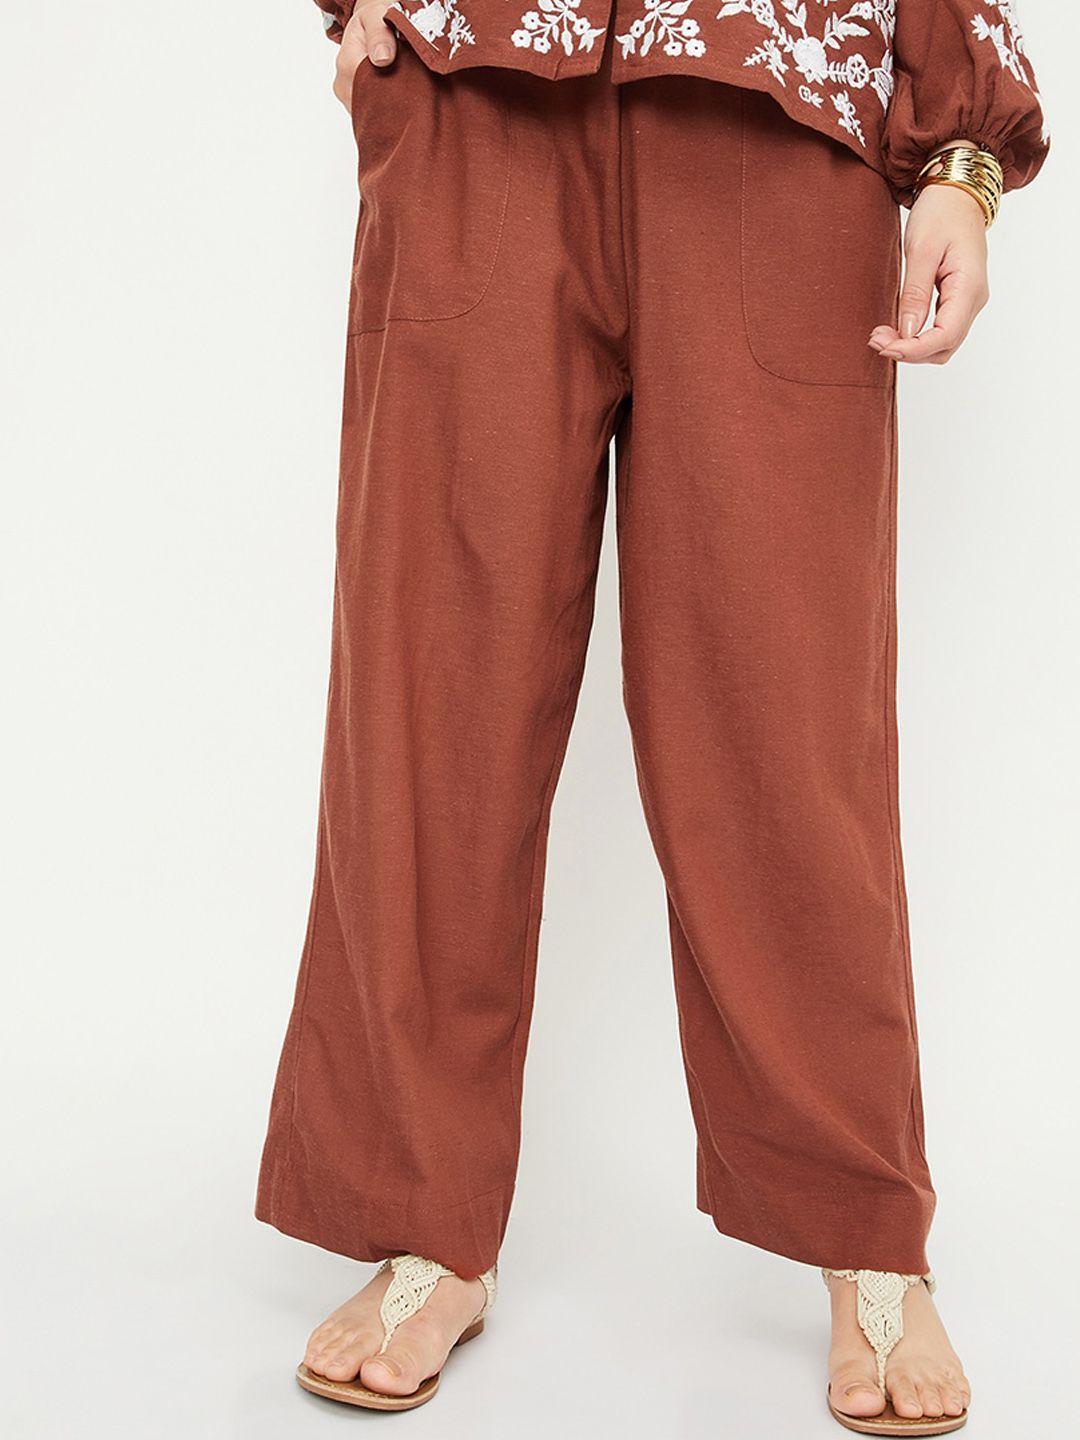 max-women-parallel-trousers